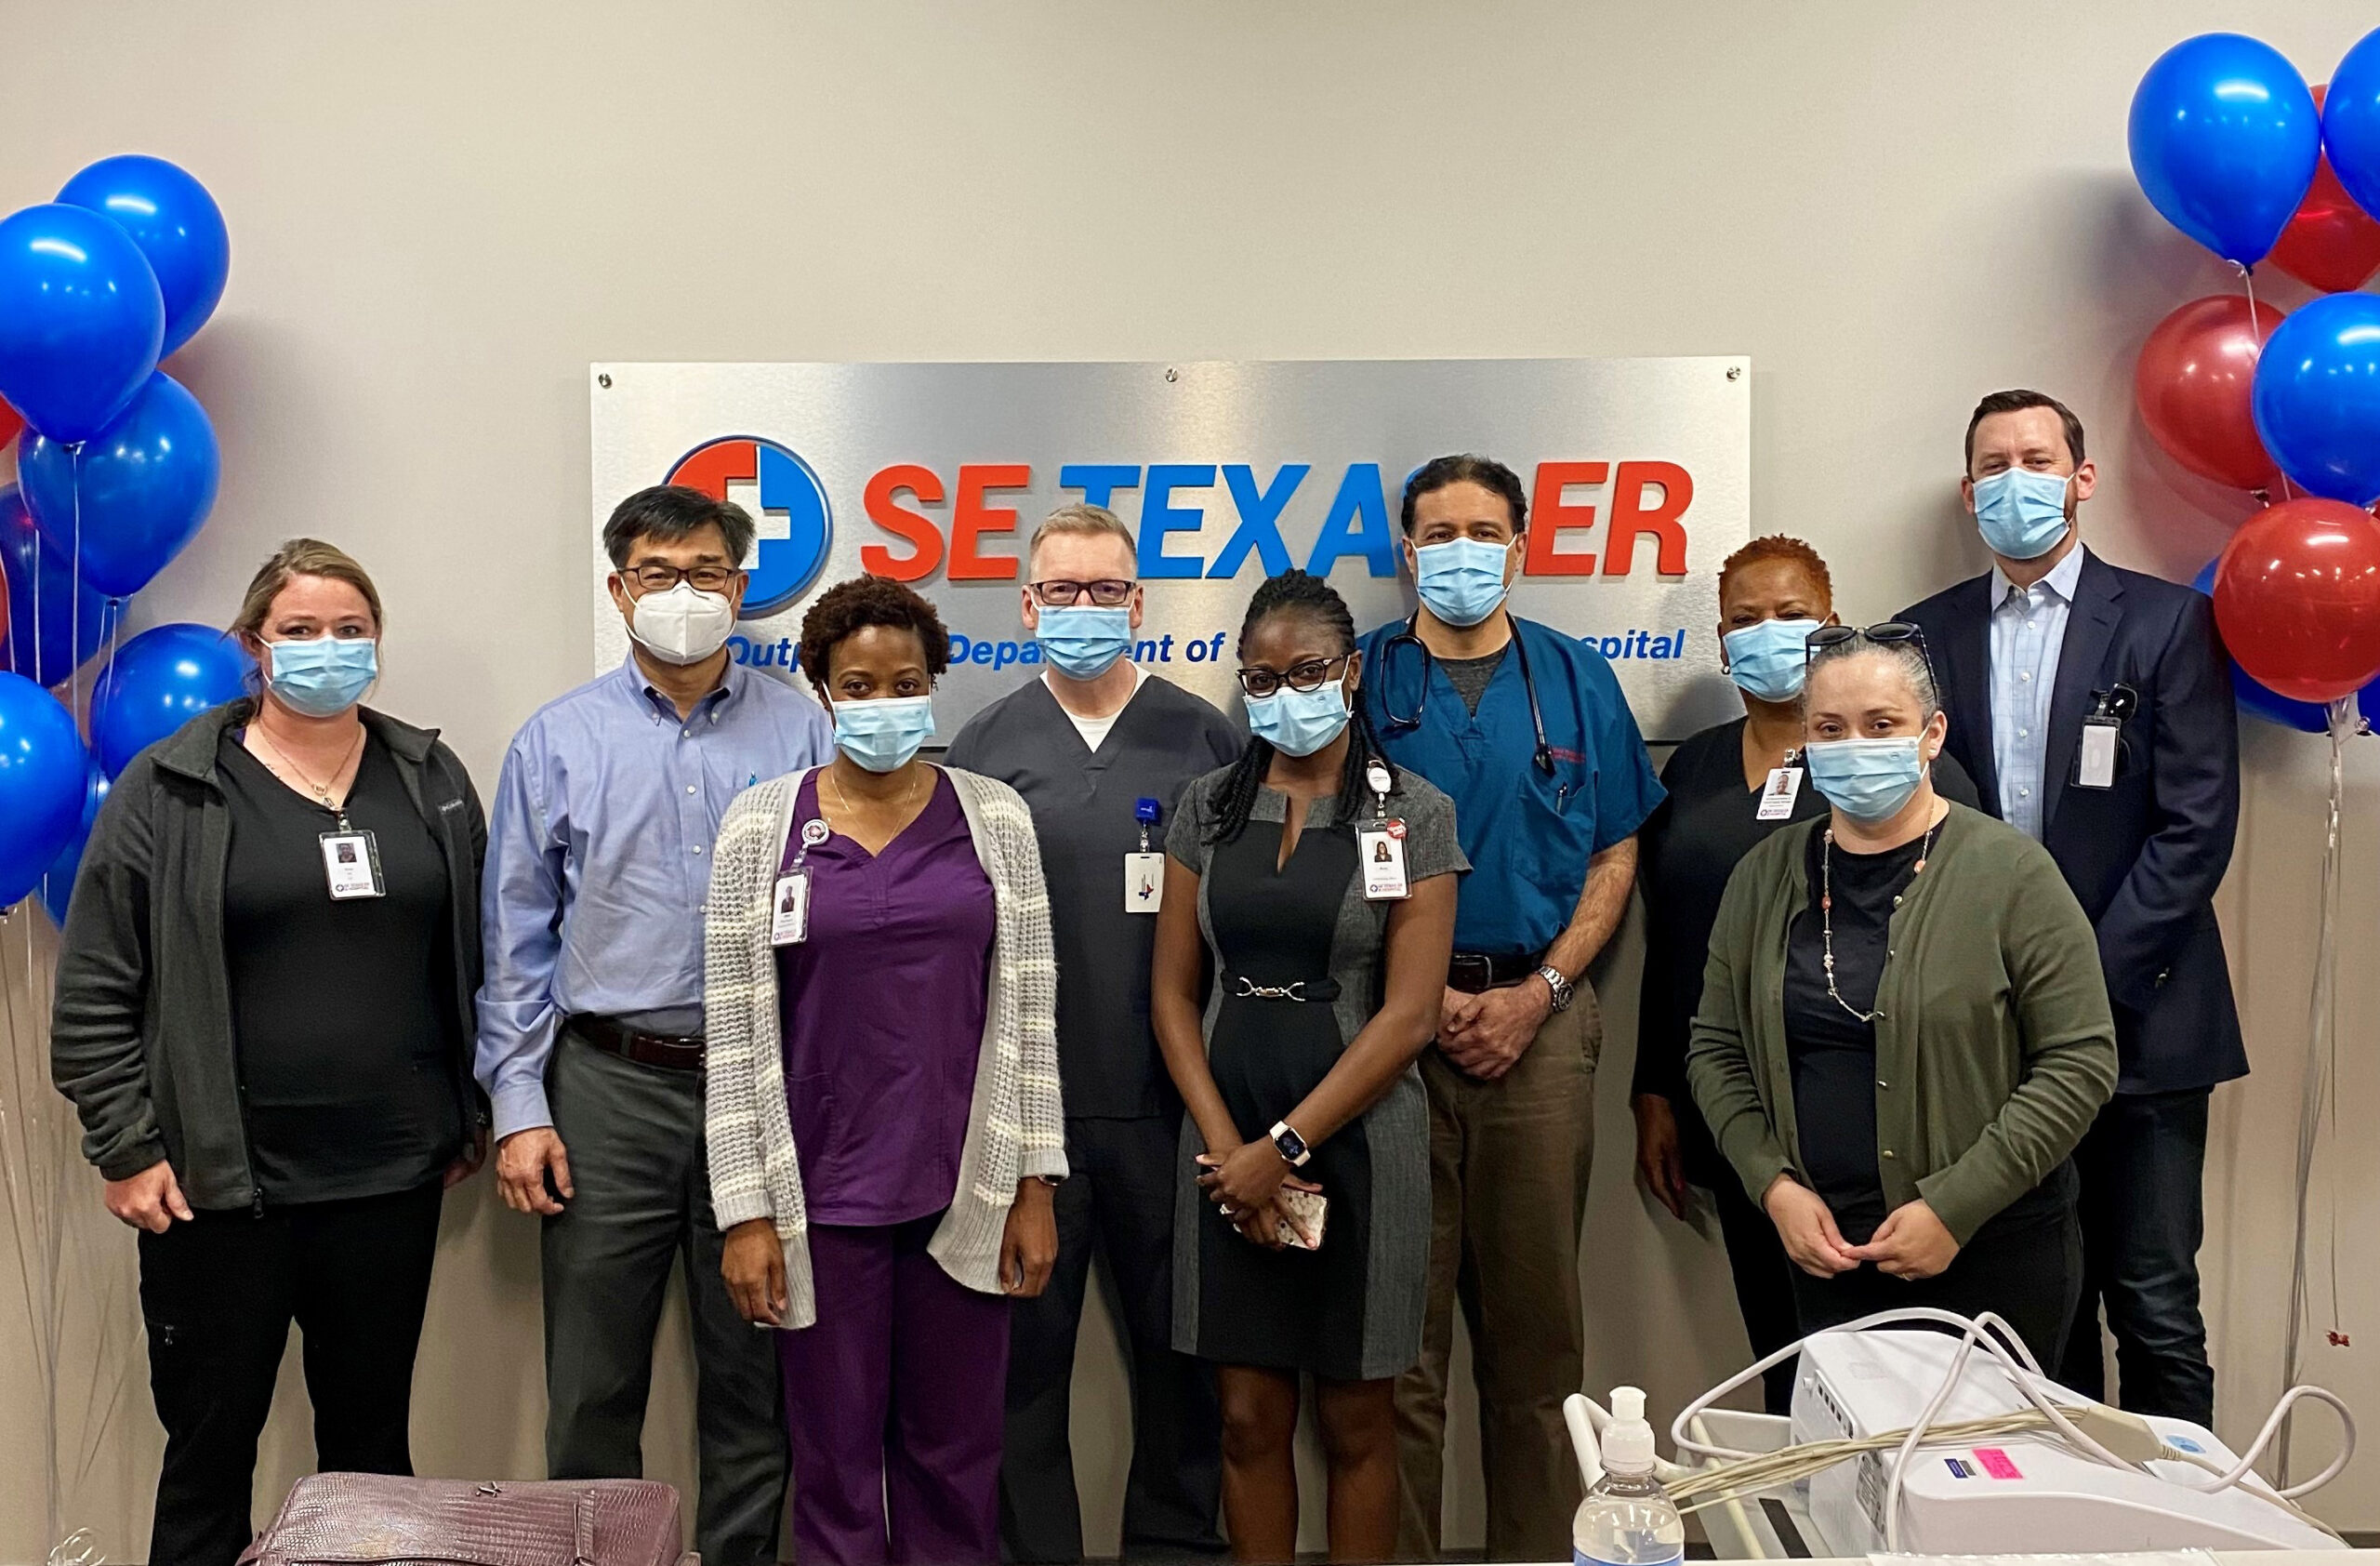 SE Texas ER Expands to Third Location, Now Open in Clear Lake